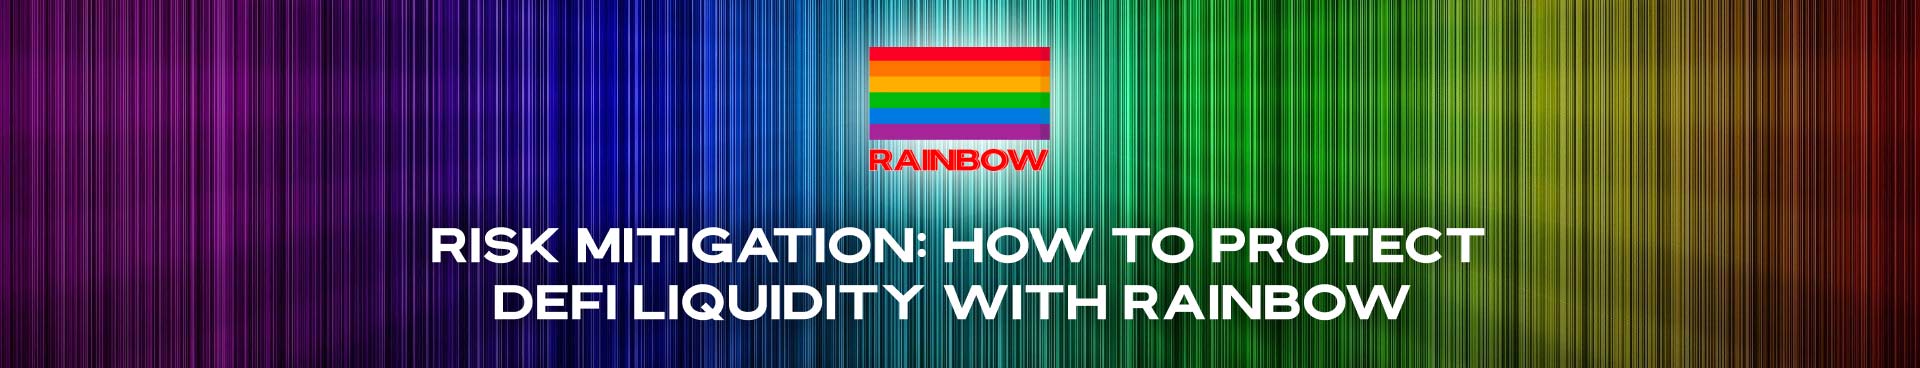 RISK MITIGATION: HOW TO PROTECT DEFI LIQUIDITY WITH RAINBOW